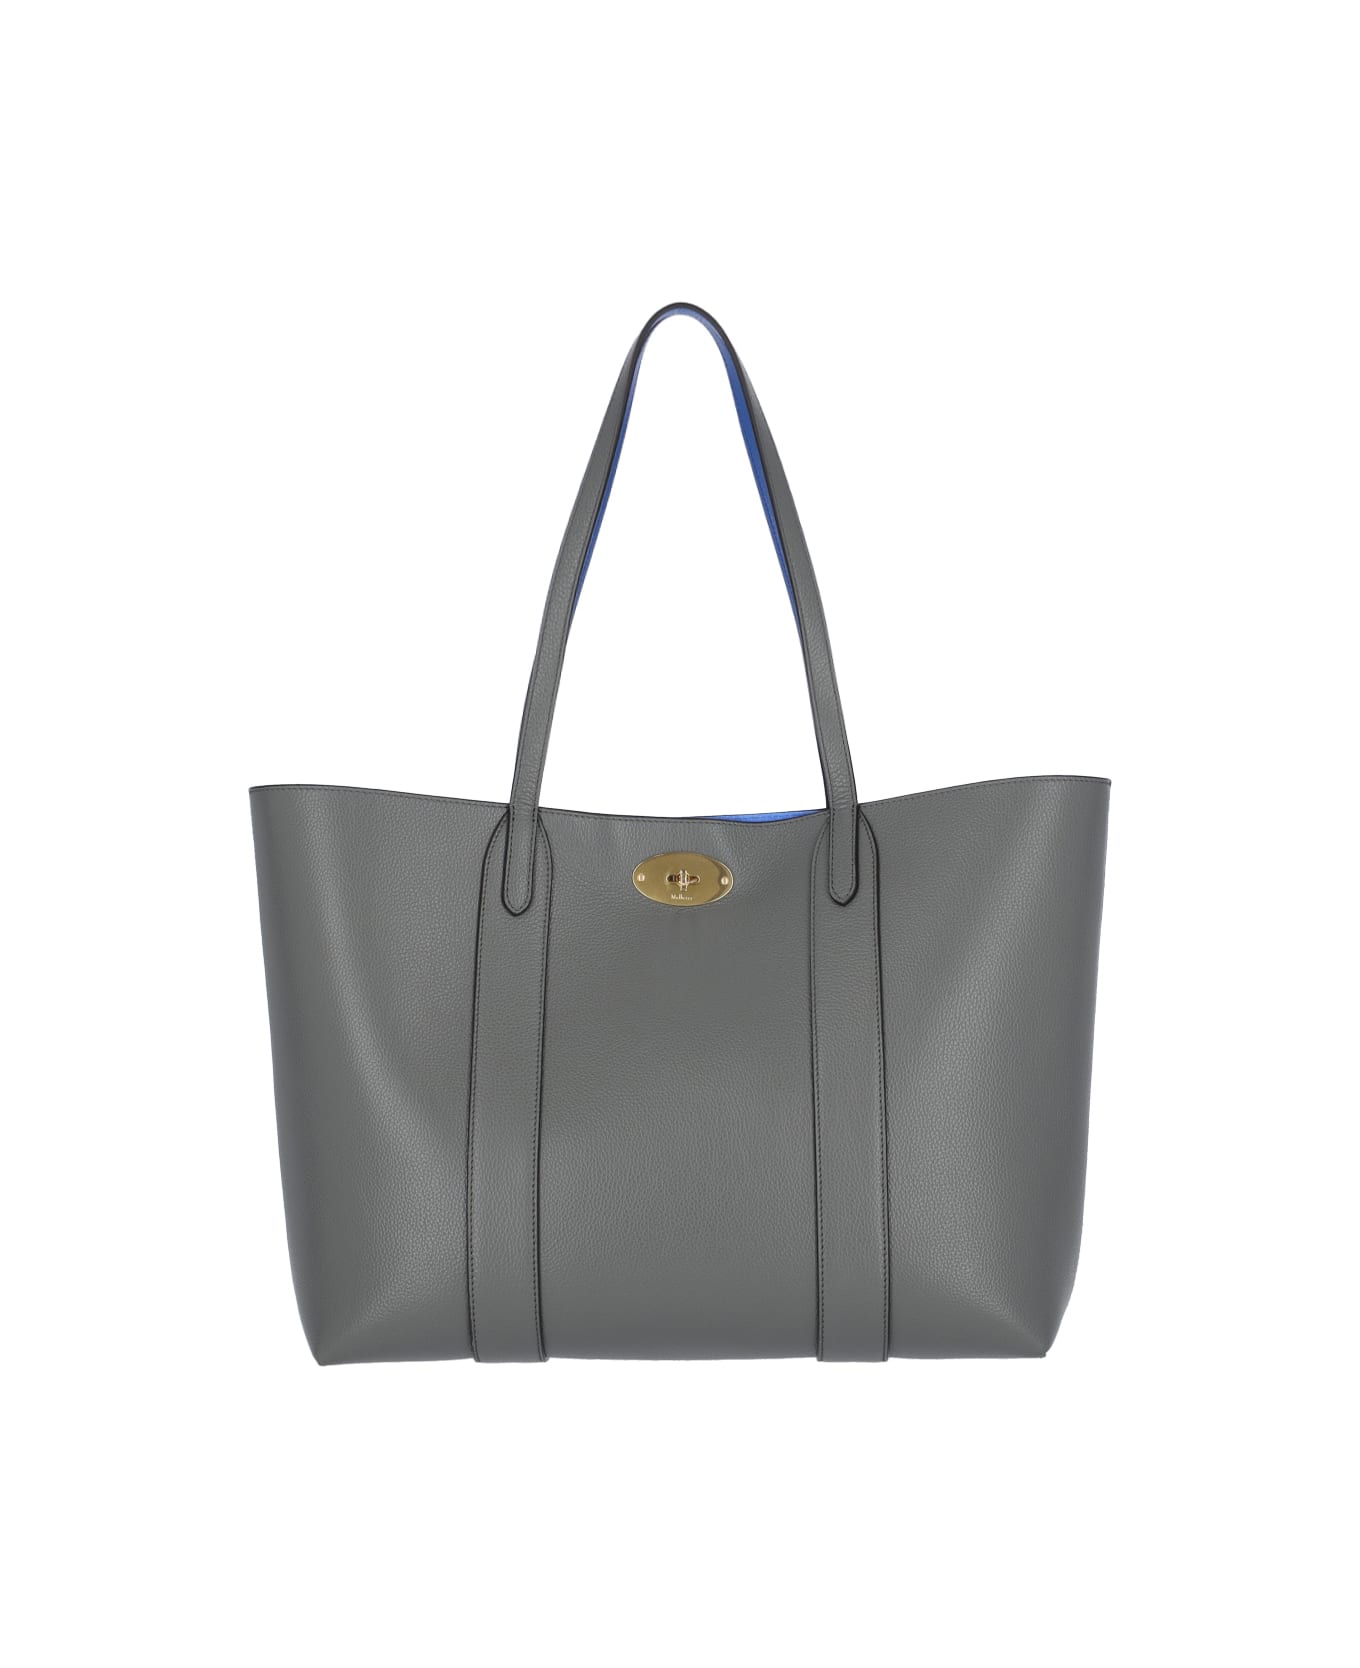 Mulberry "bayswater" Tote Bag - Gray